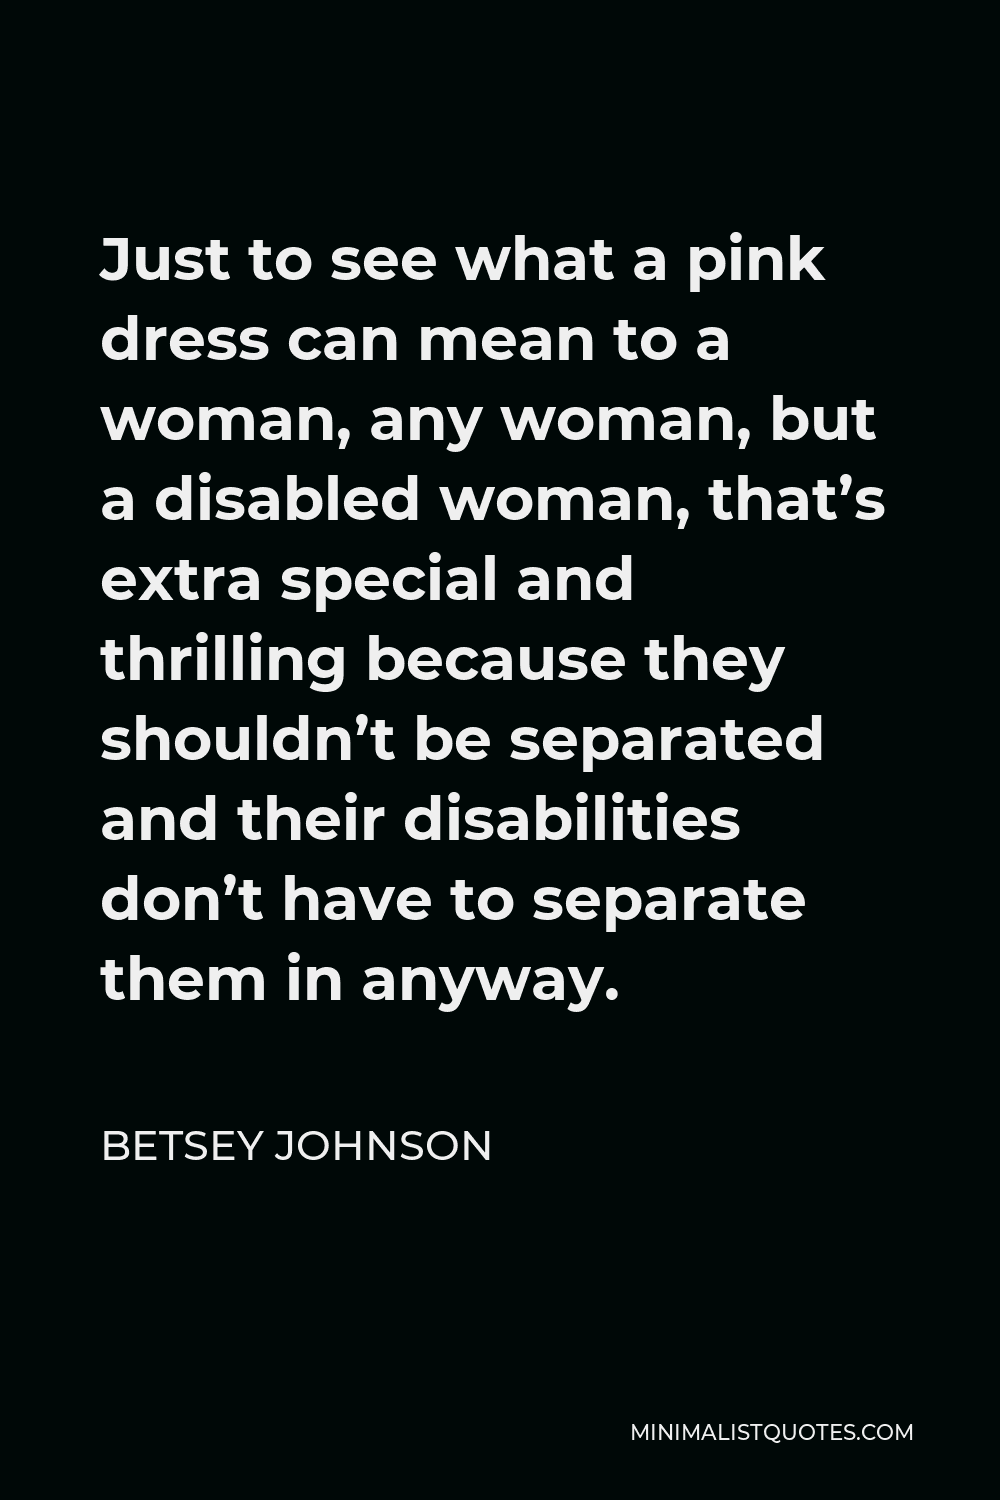 Betsey Johnson Quote - Just to see what a pink dress can mean to a woman, any woman, but a disabled woman, that’s extra special and thrilling because they shouldn’t be separated and their disabilities don’t have to separate them in anyway.